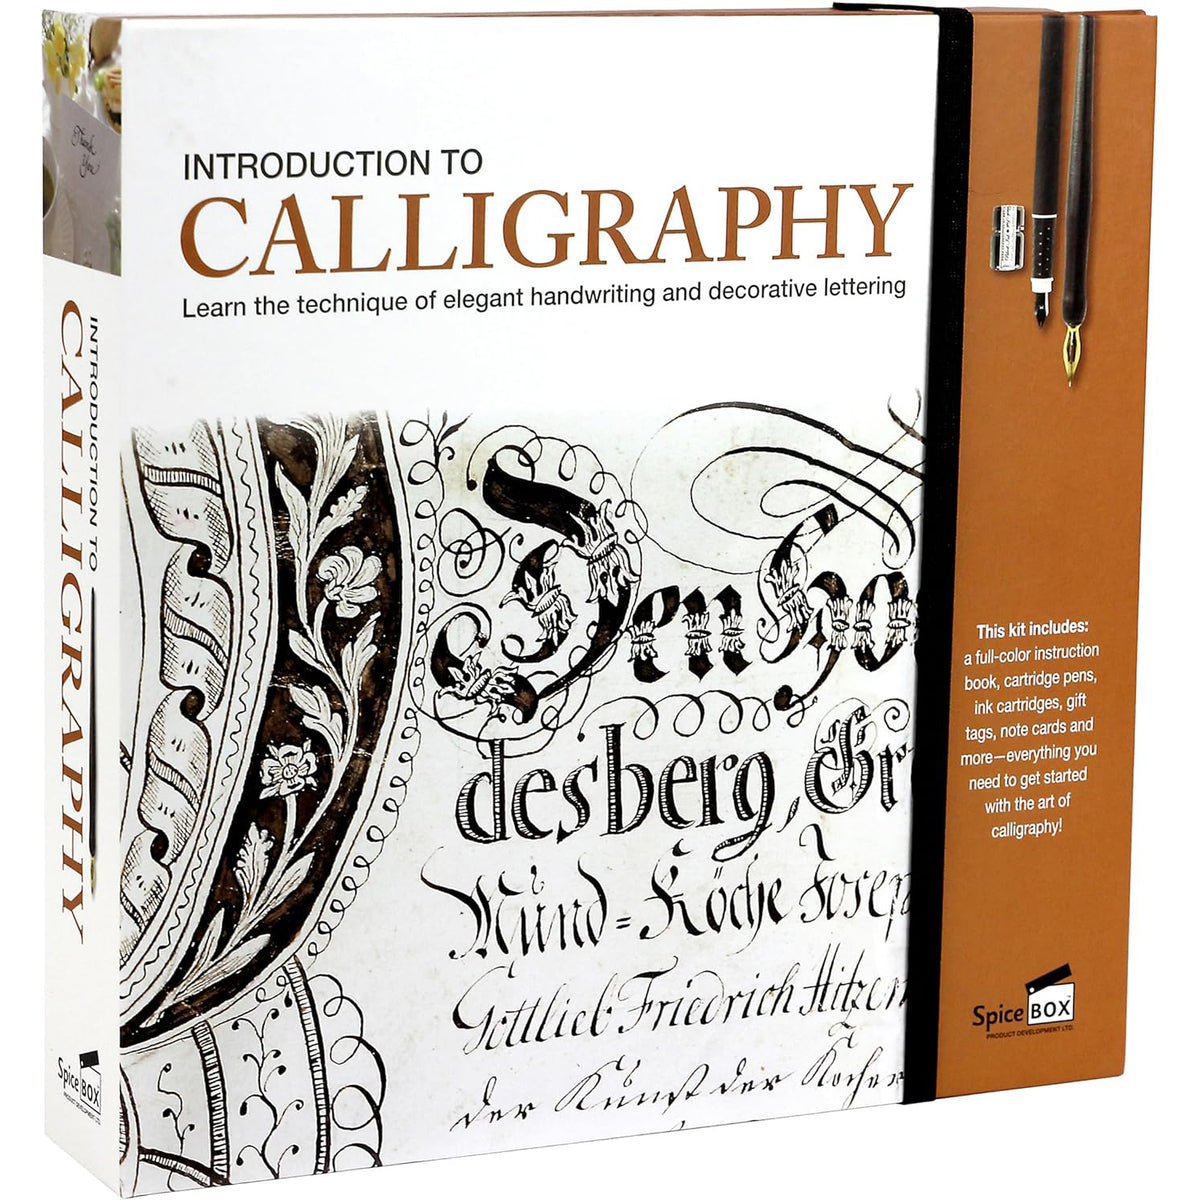 Introduction to Calligraphy Kit